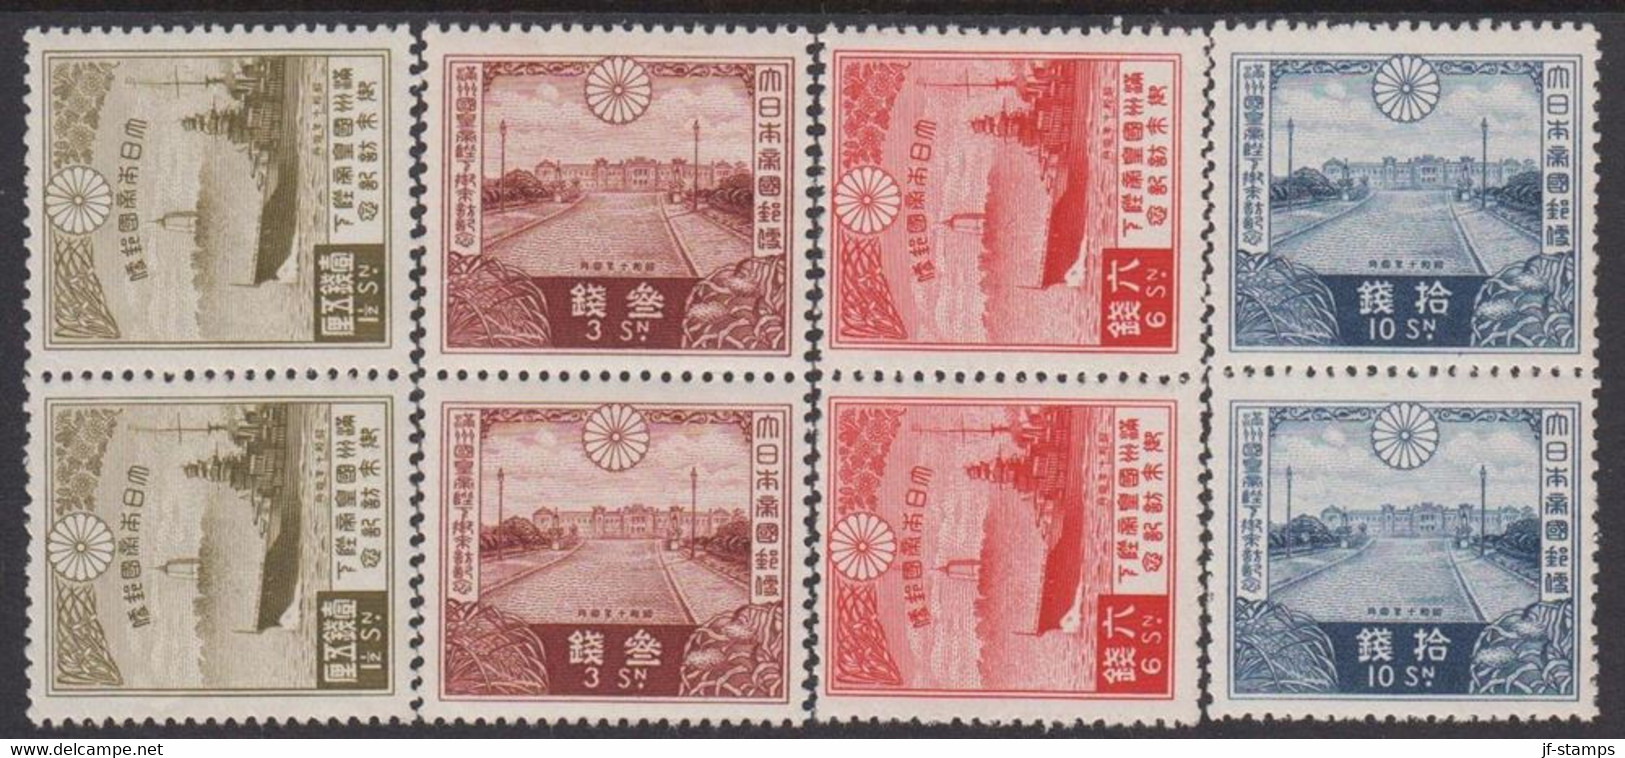 1935. JAPAN. Statevisit In Mandchuko Complete Set In Pairs Never Hinged. Very Fine Set.  (Michel 213-216) - JF529361 - Unused Stamps